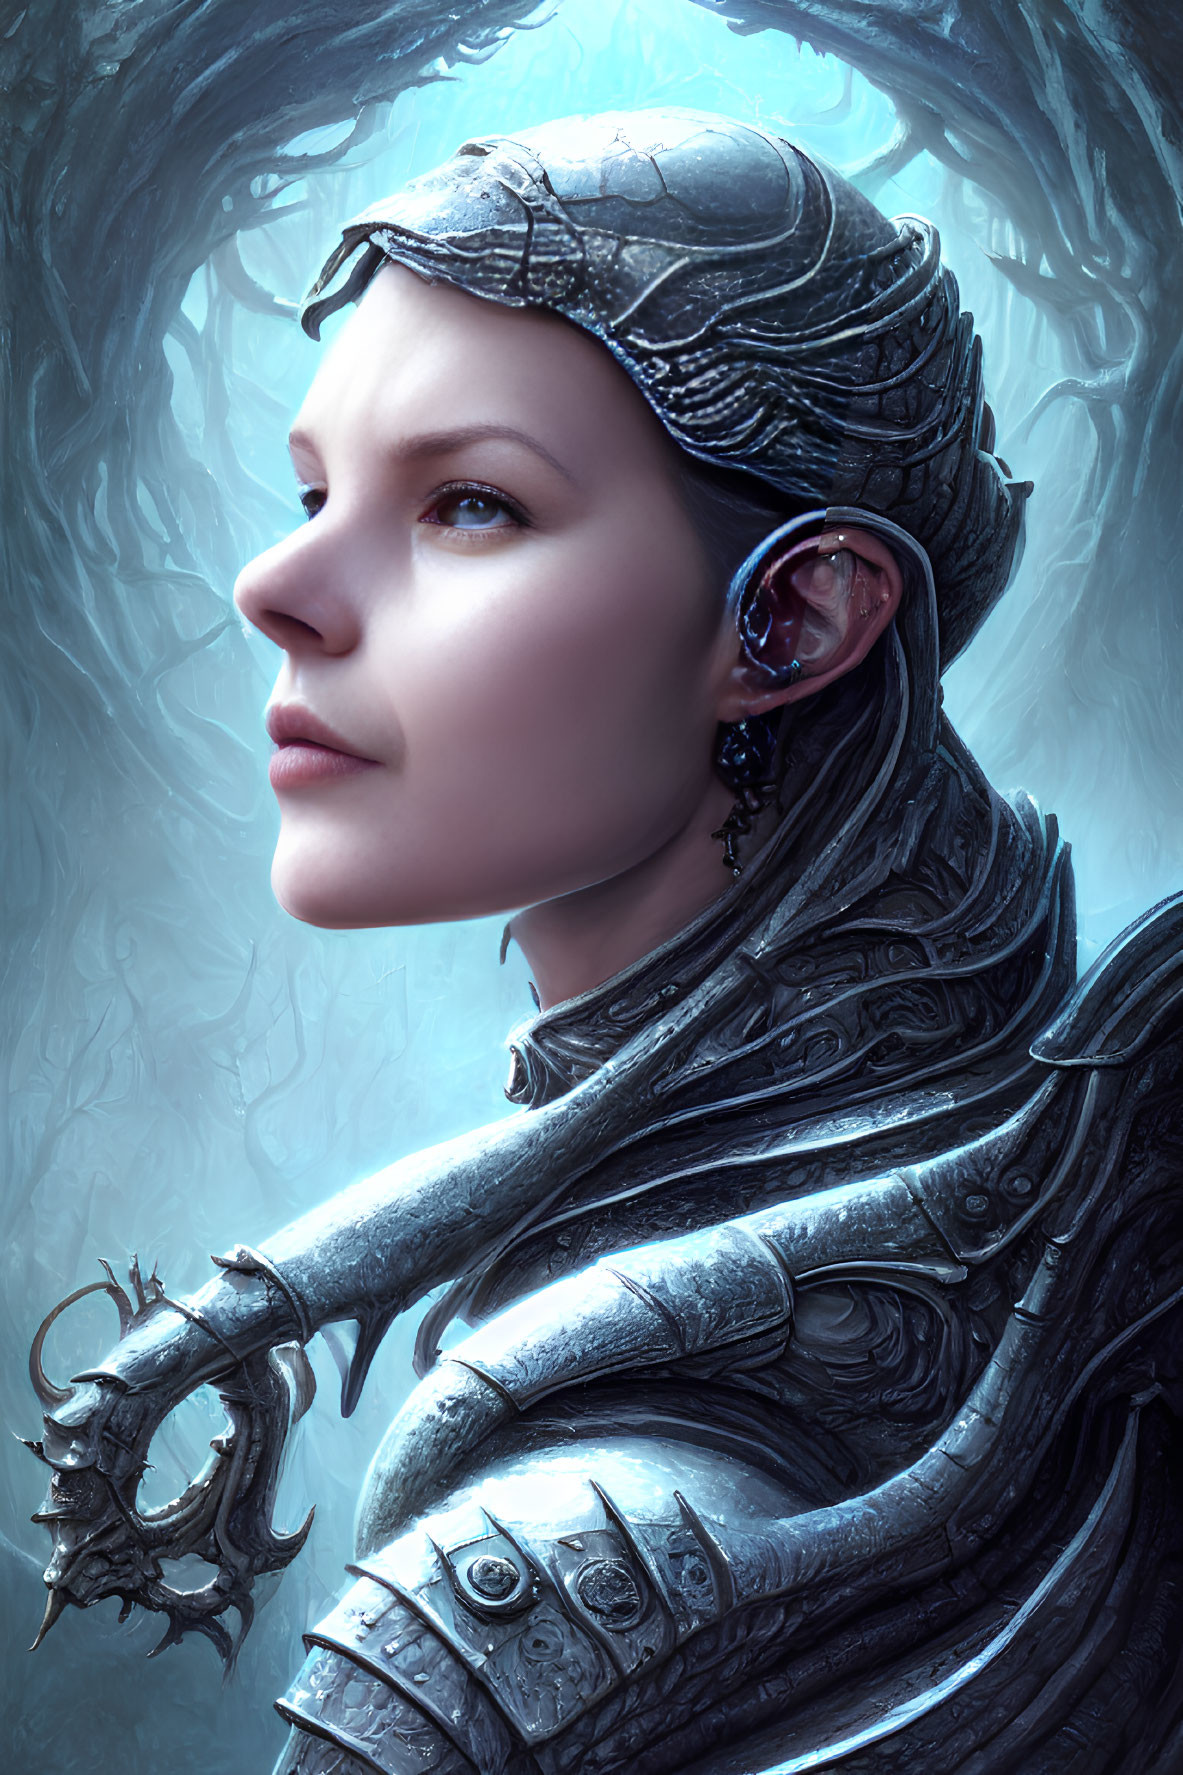 Digital artwork of woman in ornate armor with mystical backdrop and intricate helmet